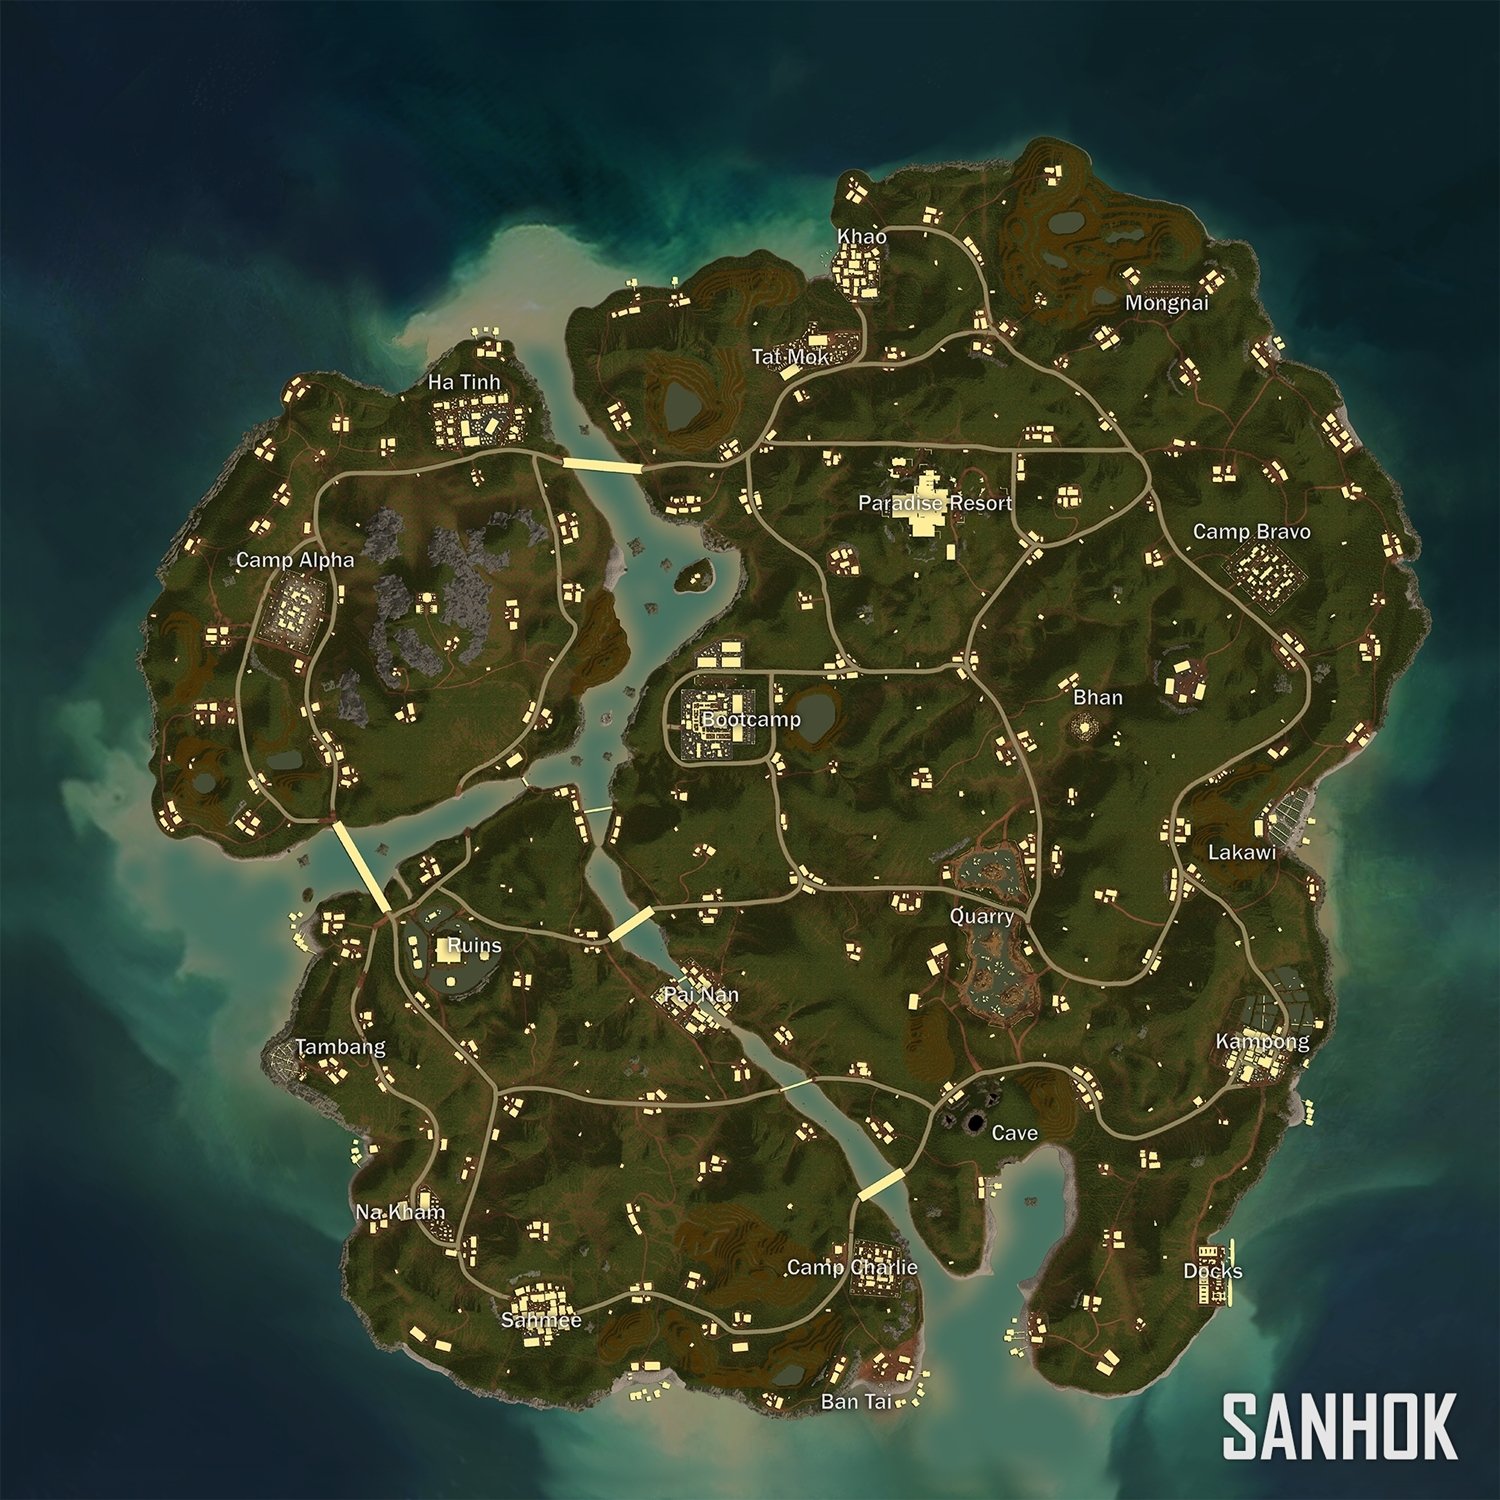 An overhead view of the new Sanhok Map in PlayerUnknown's Battlegrounds.